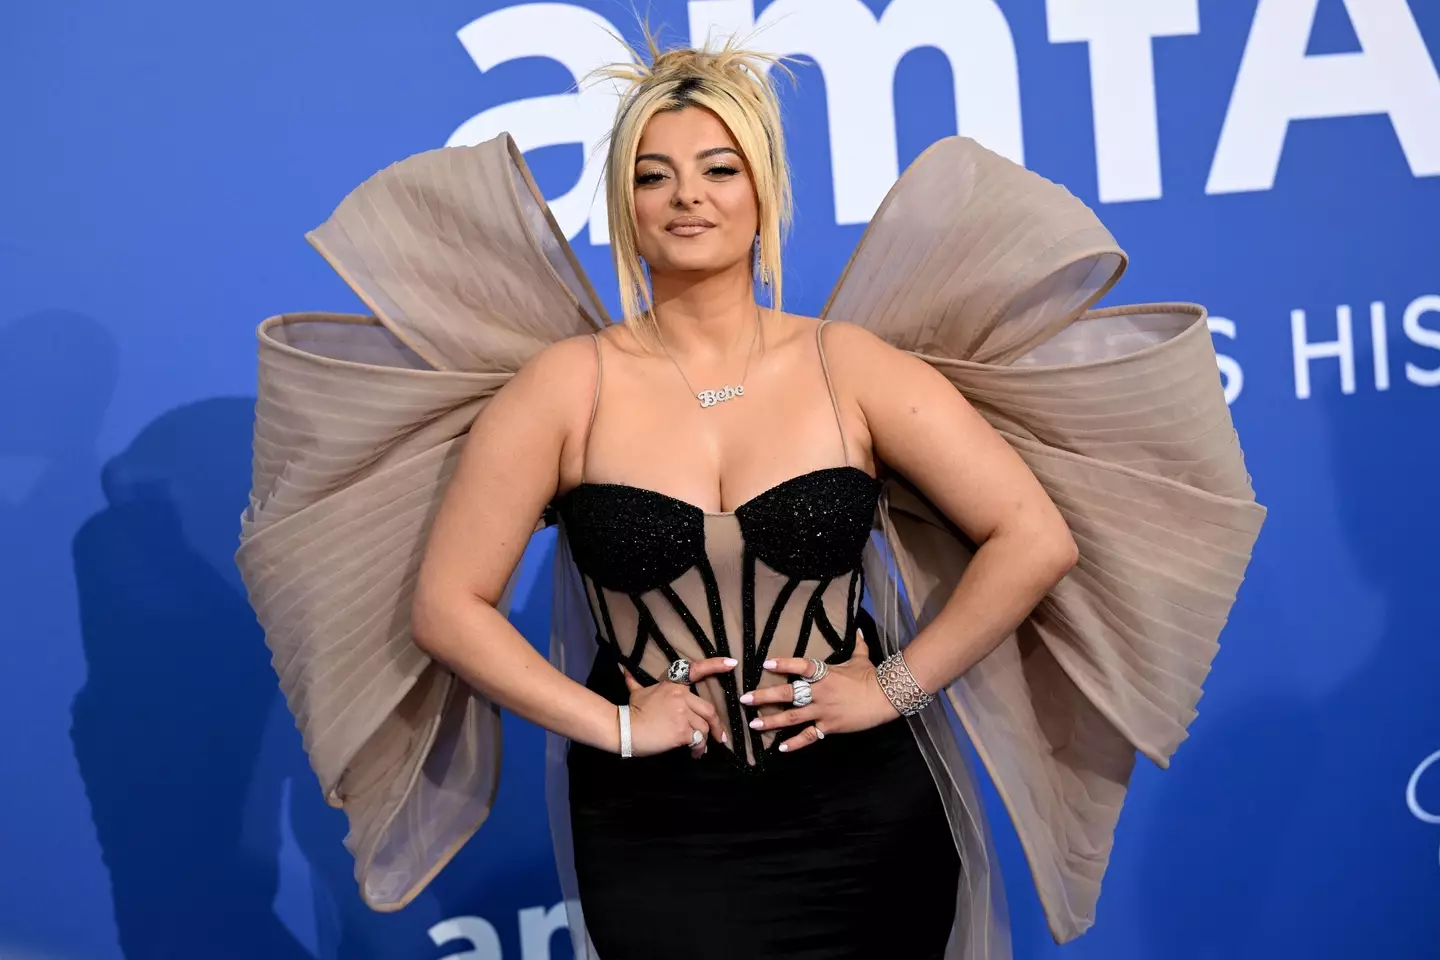 Bebe Rexha has claimed she could 'bring down' the music industry. (STEFANO RELLANDINI/AFP via Getty Images)